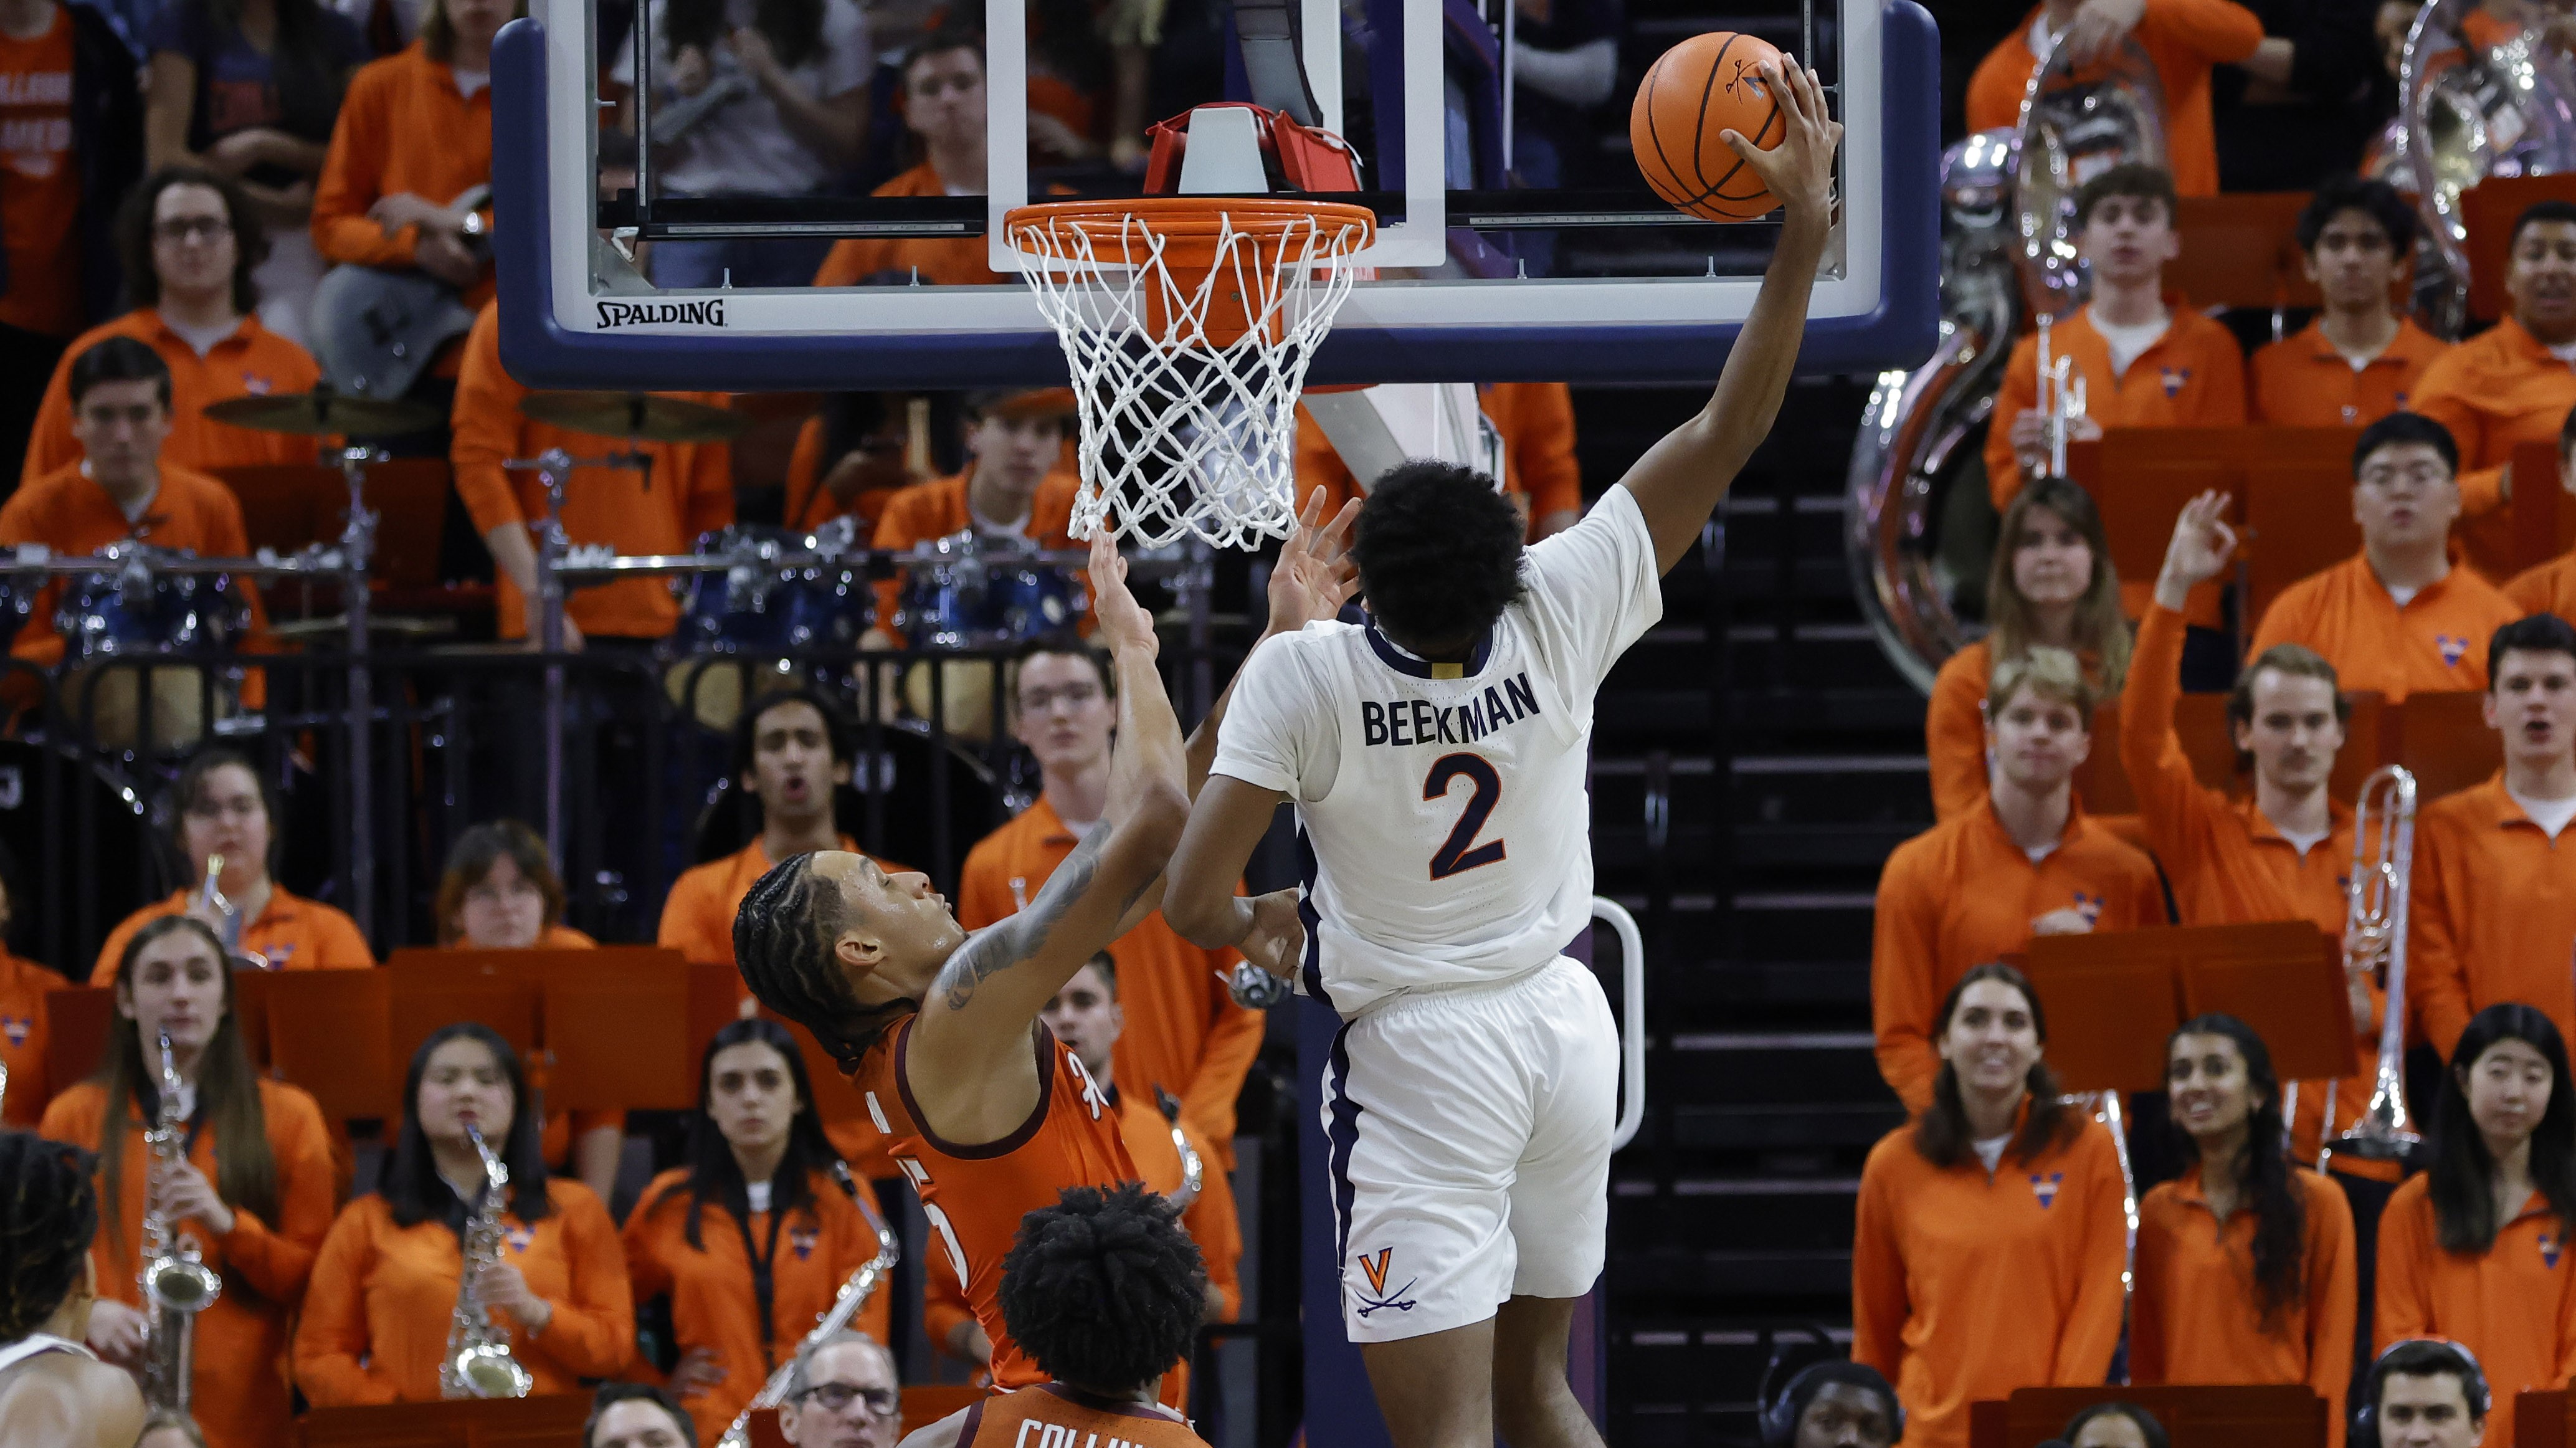 WATCH: Highlights & Postgame From Virginia’s Win Over Virginia Tech